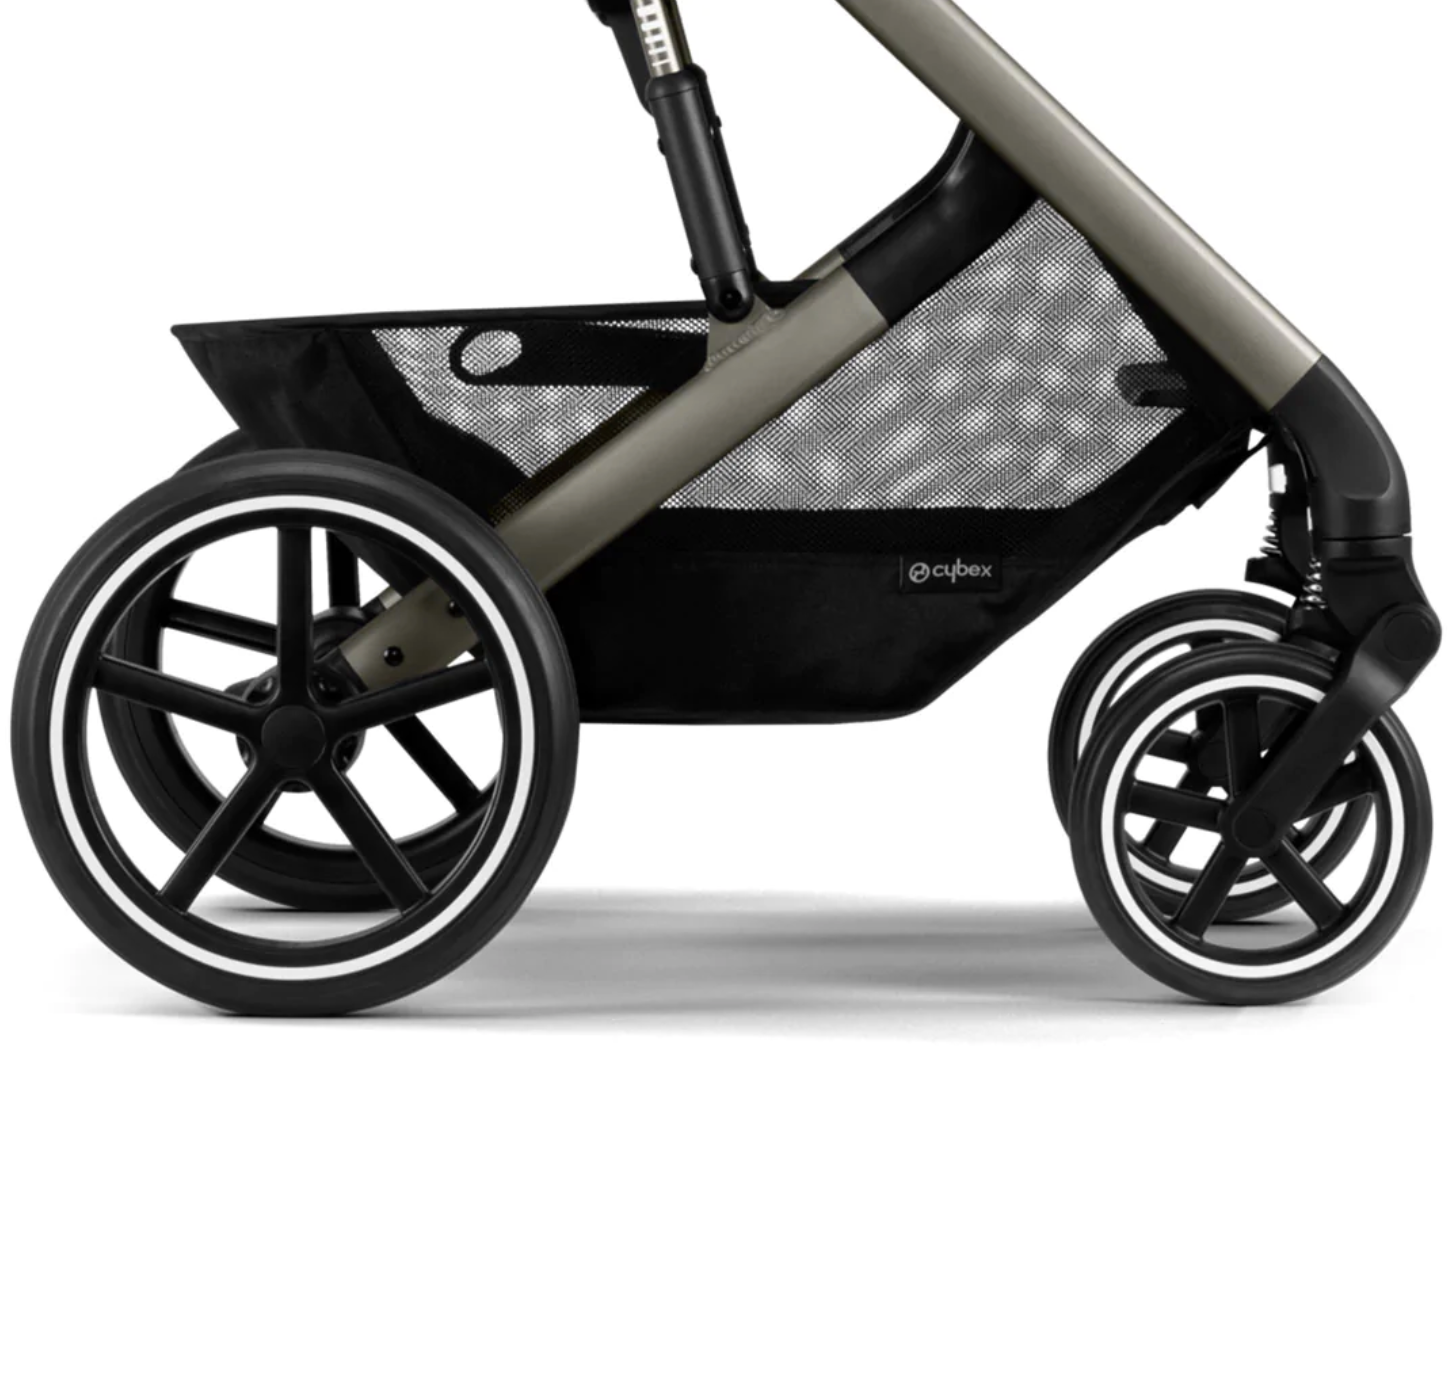 Cybex Balios S Lux Pushchair - Seashell Beige | Taupe | Shopping basket